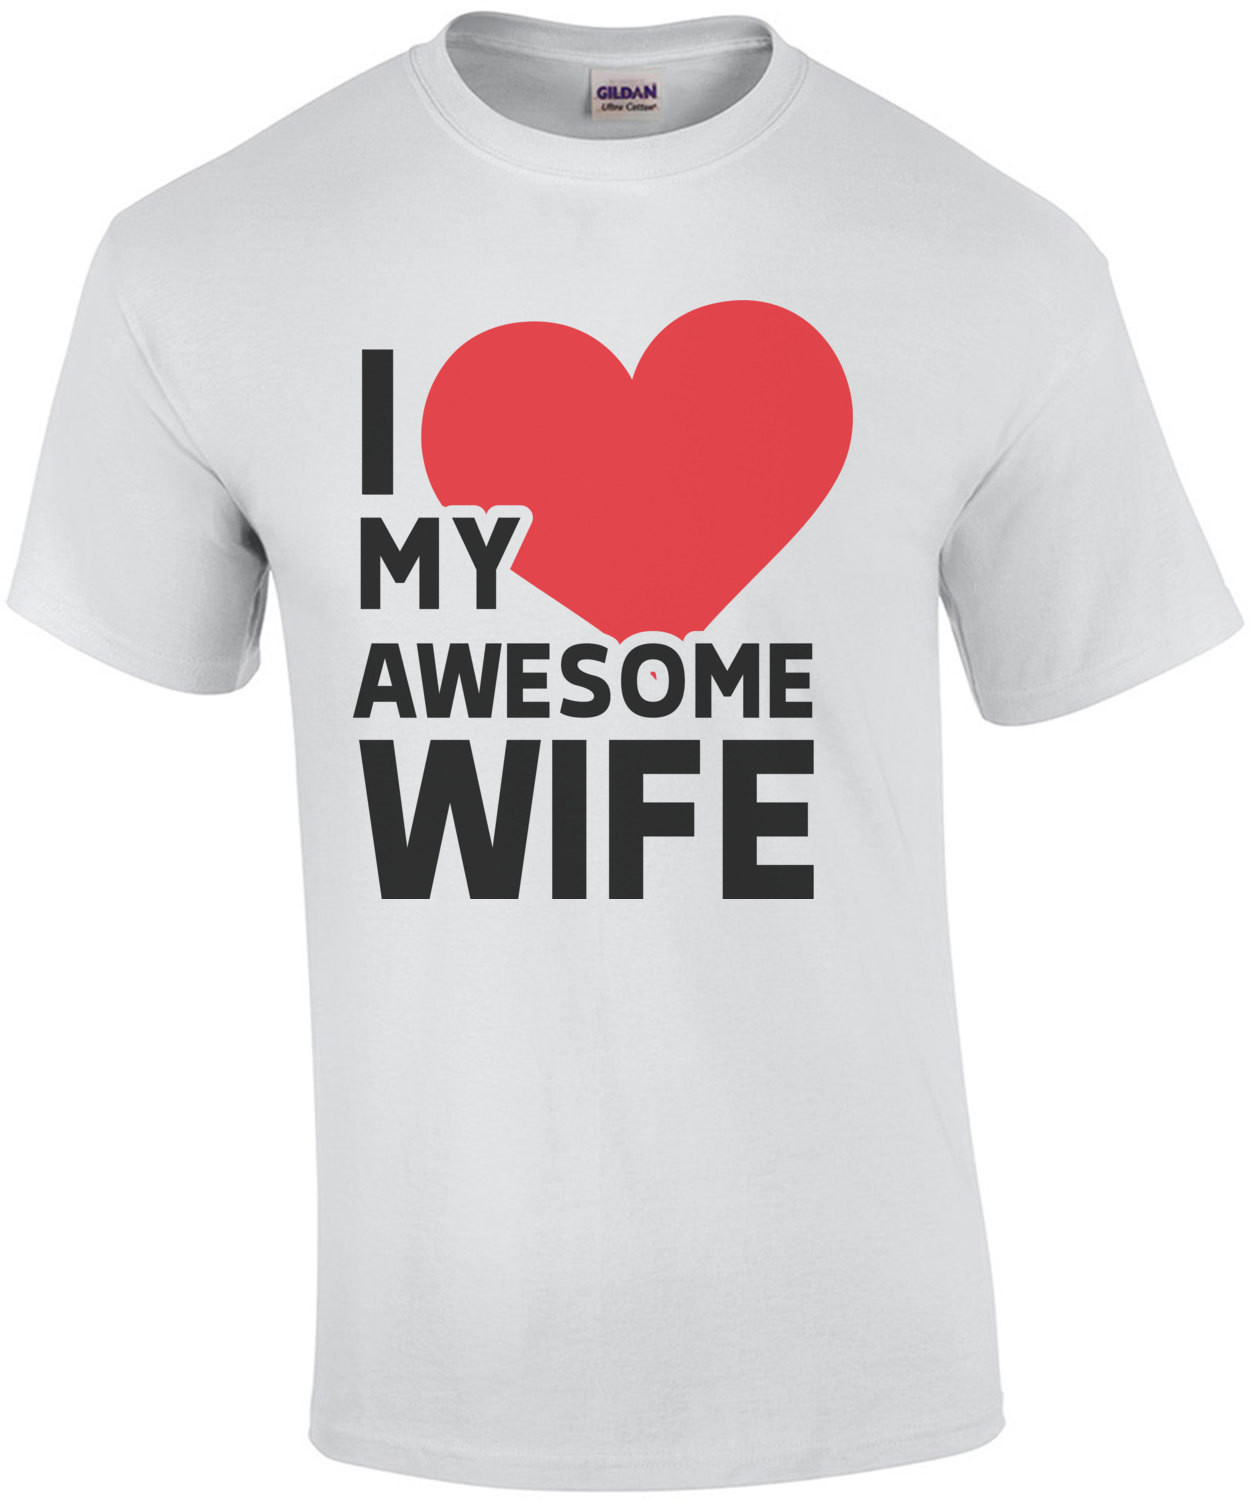 I love my awesome wife - wife t-shirt